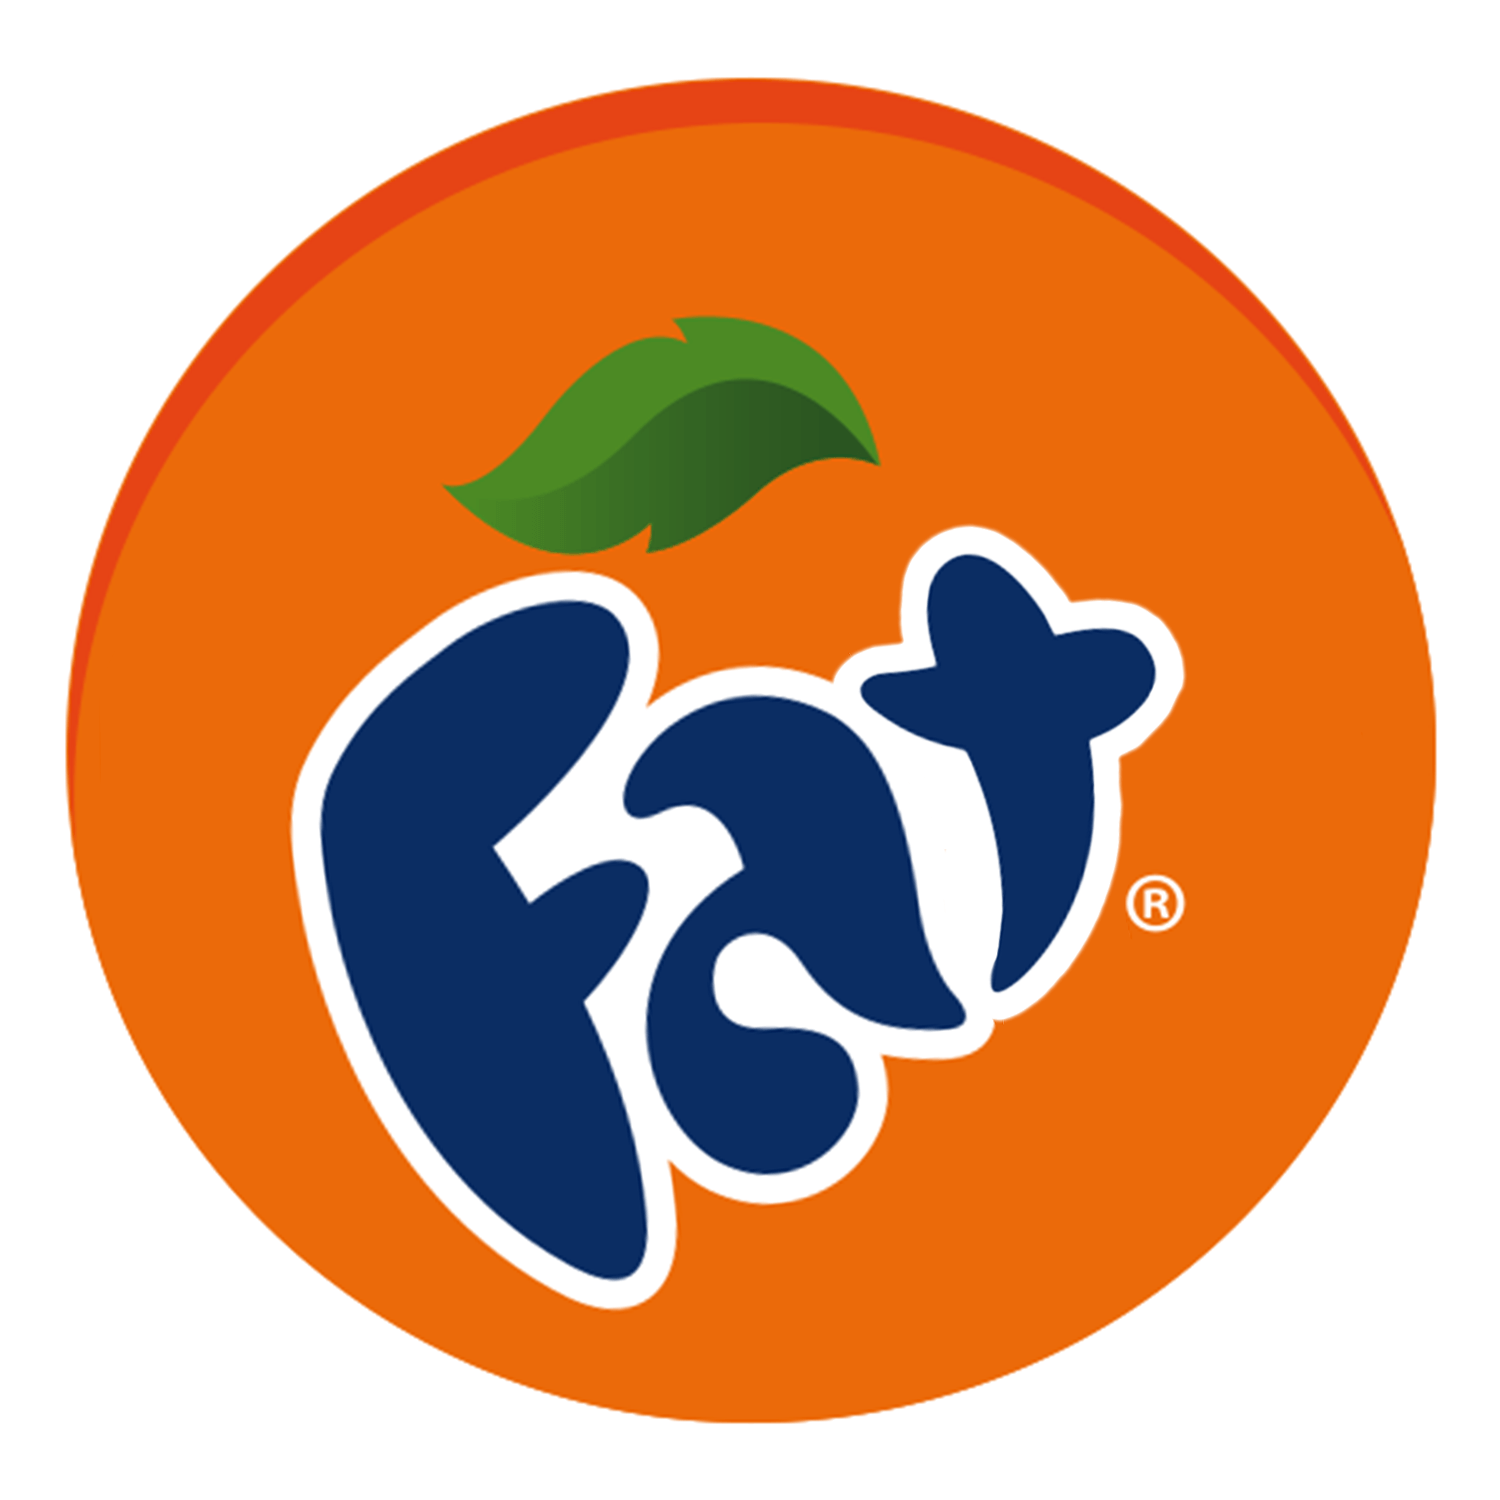 Appropriate Logo - Fanta thinking about a logo change to be more appropriate : sbubby